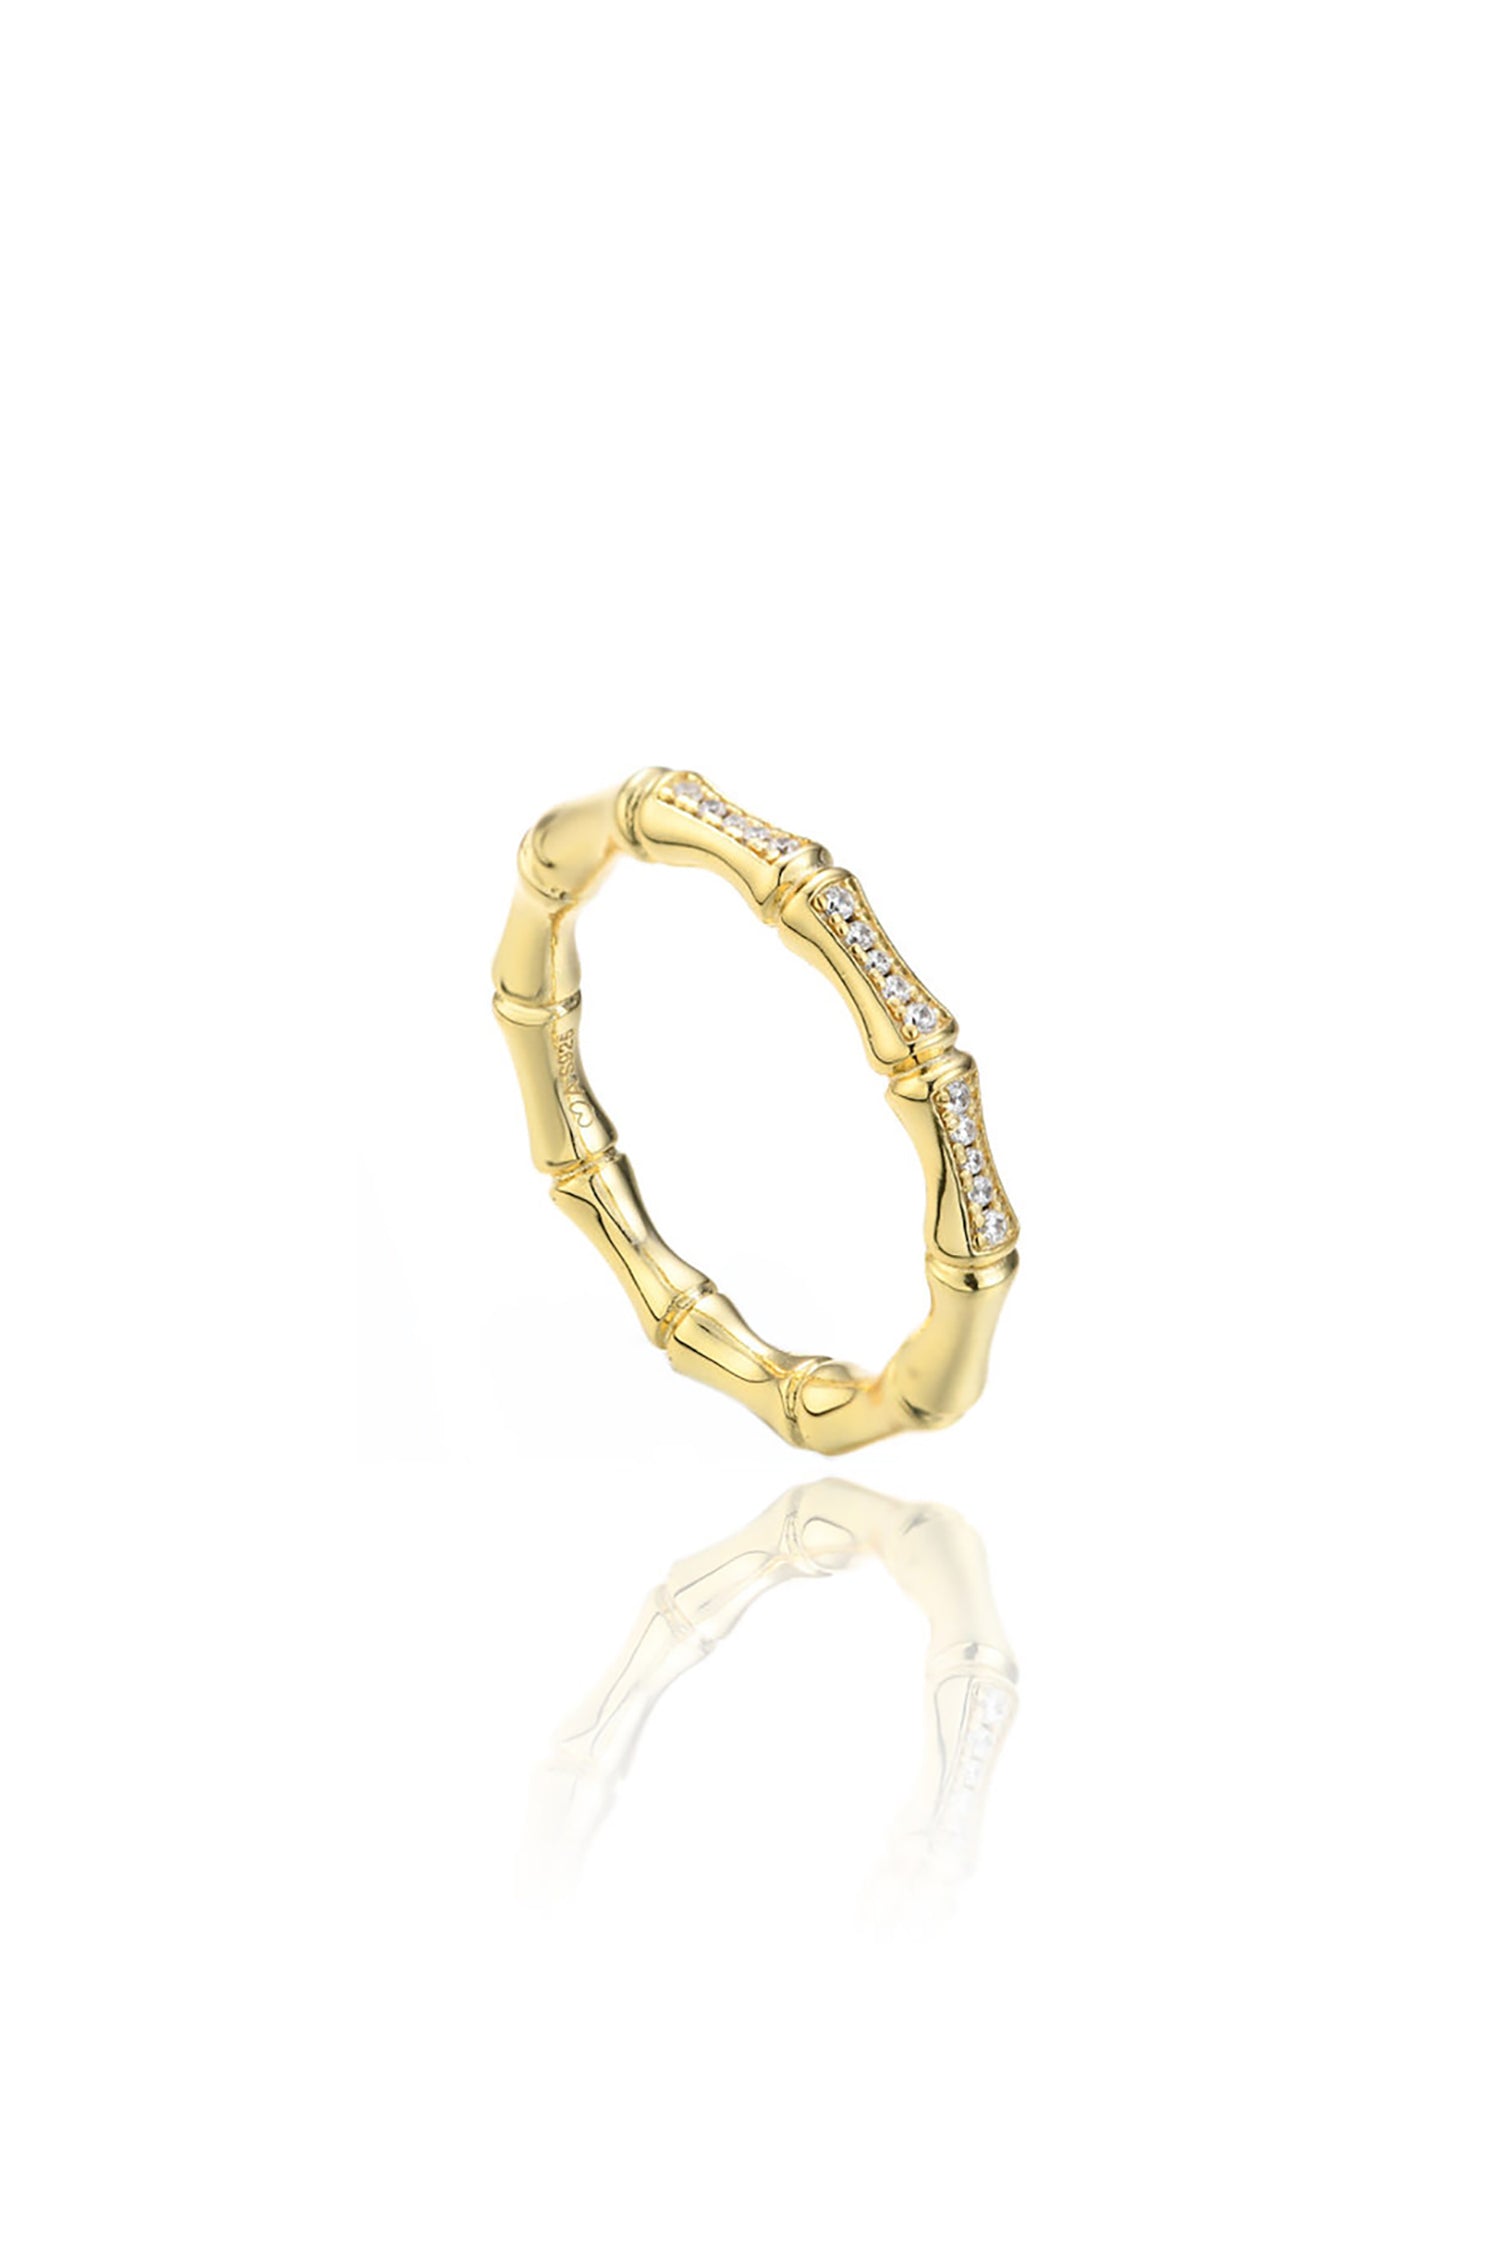  Bamboo Ring 14k Gold Plated Sterling Silver  White Background